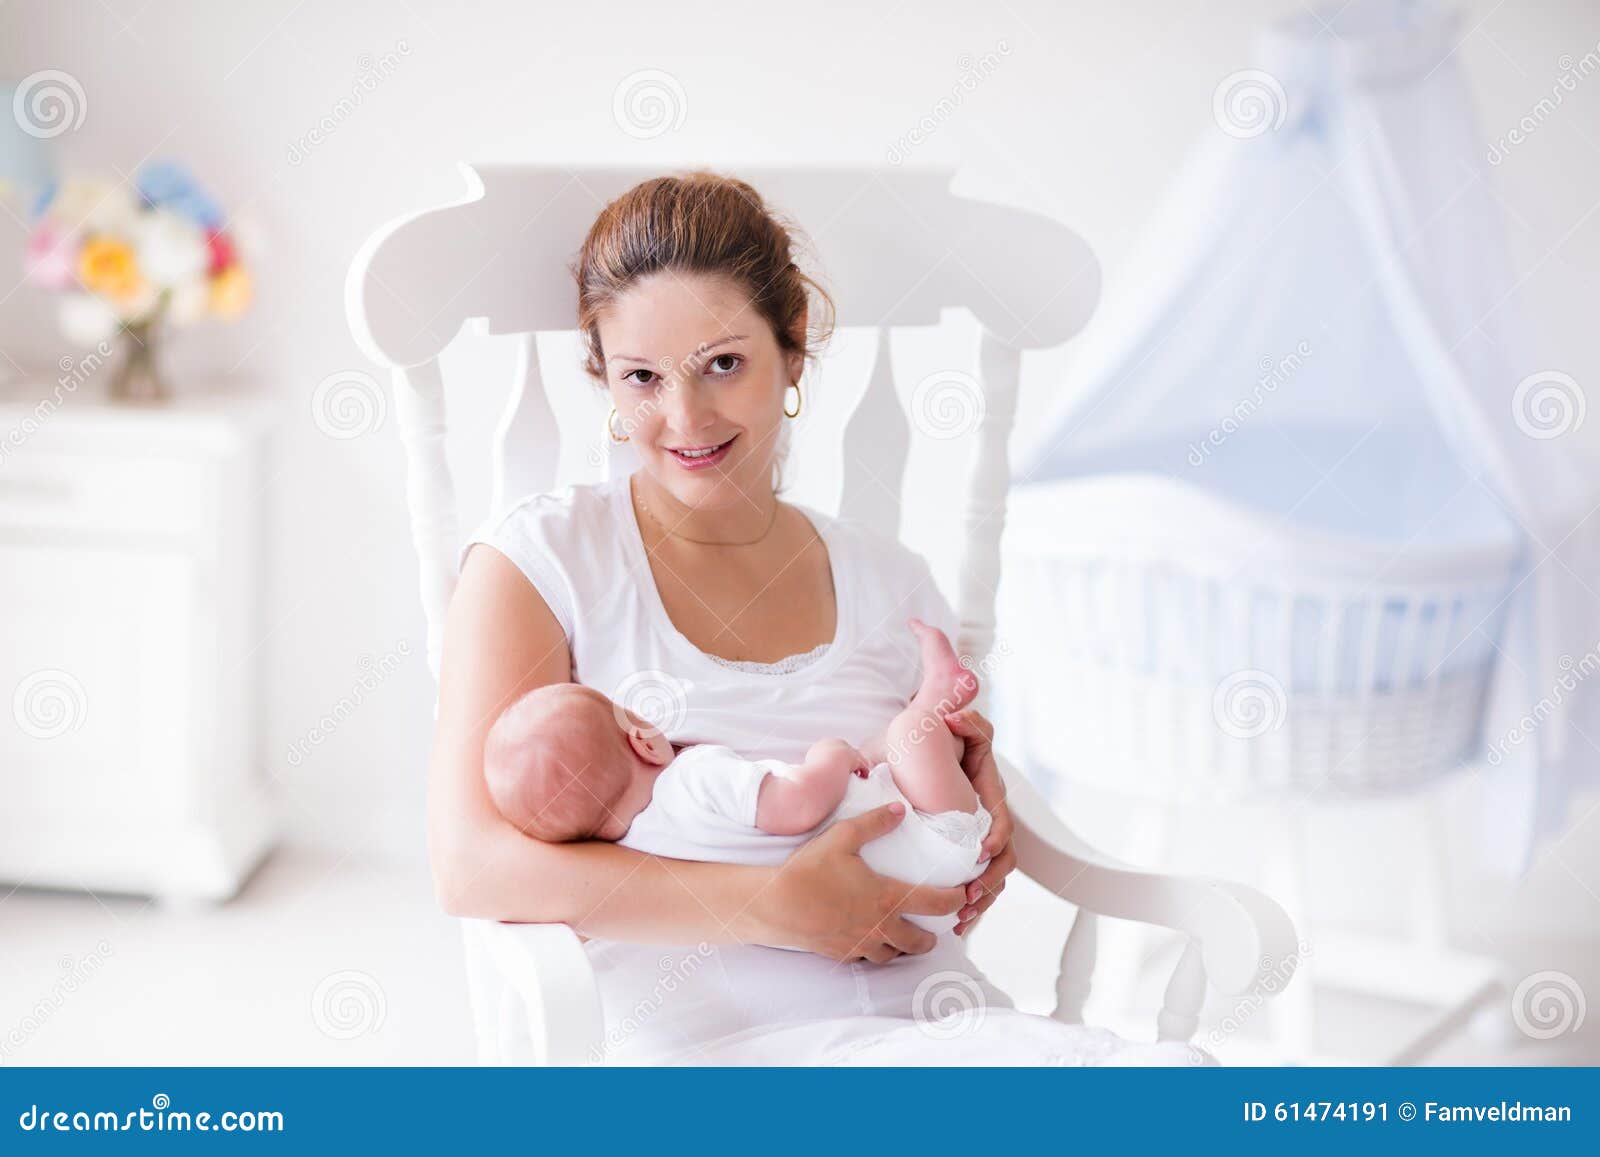 Mother Milk Stock Photos, Images, & Pictures | Shutterstock